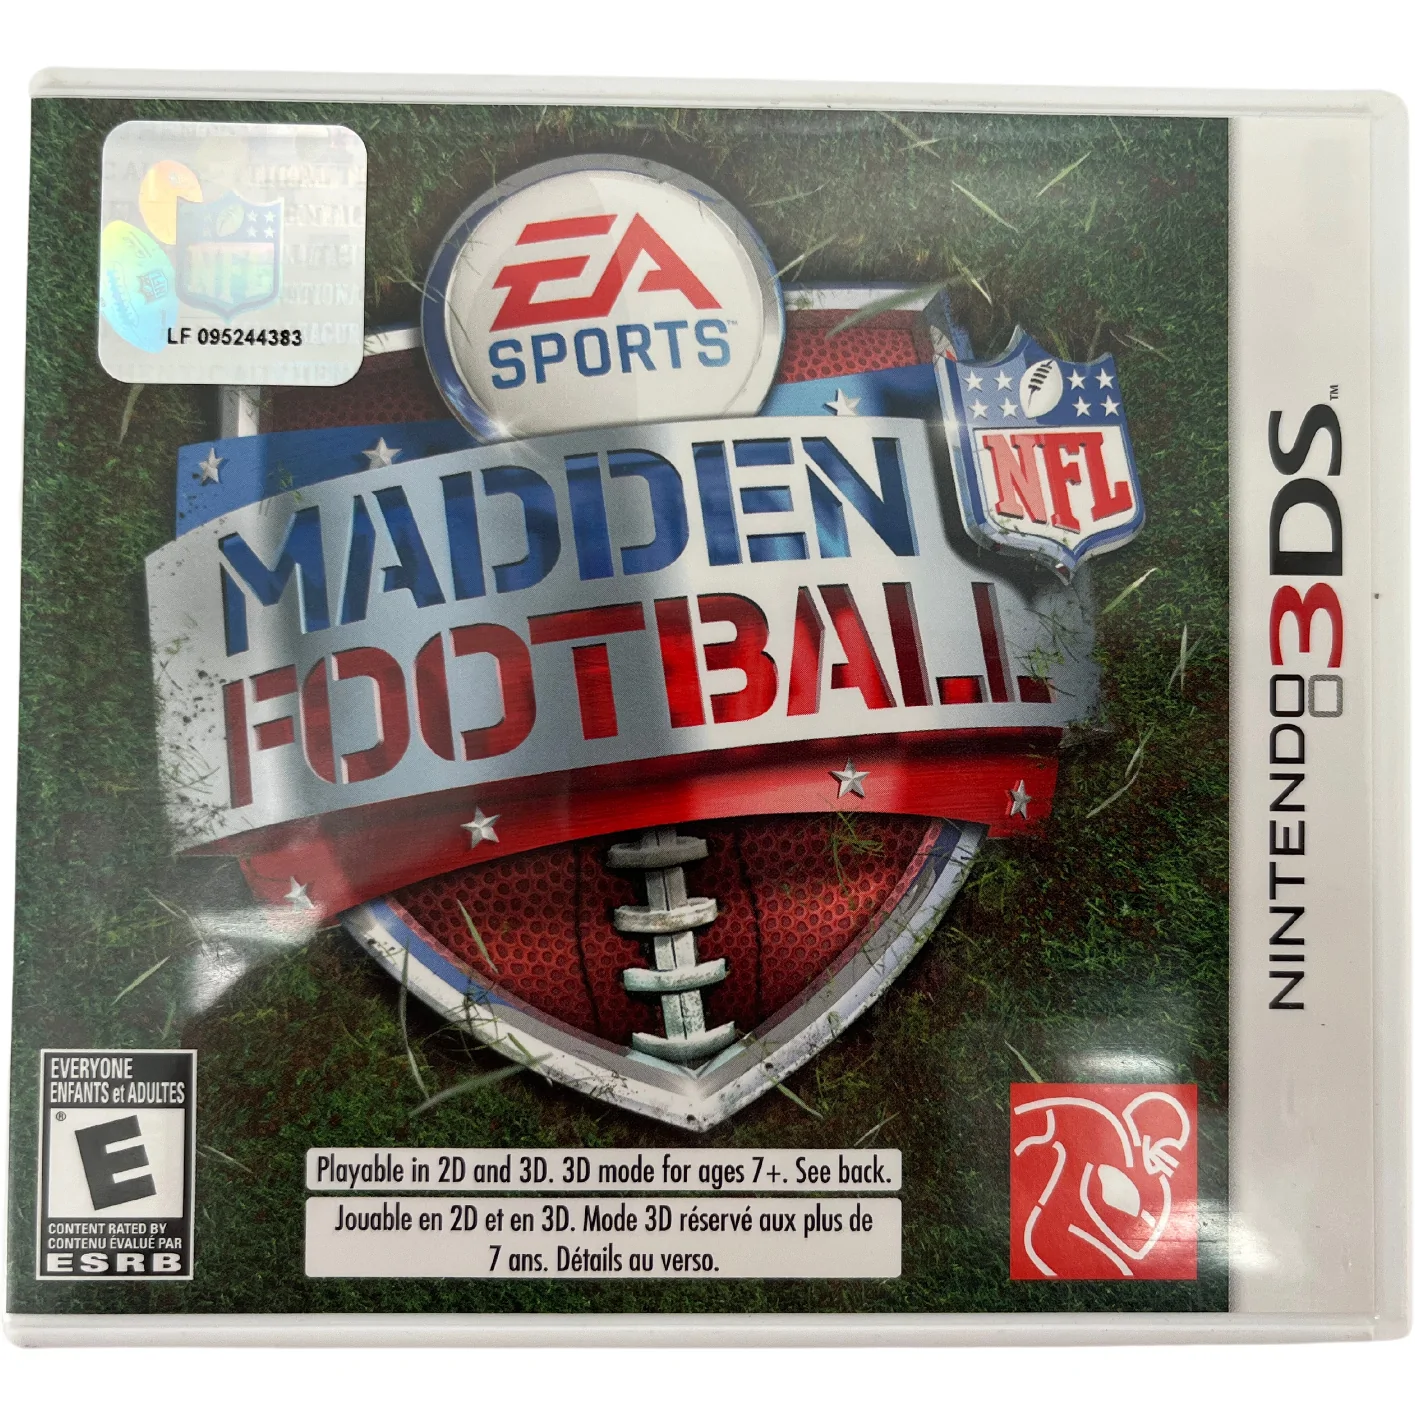 Nintendo 3DS Madden Football Video Game: NFL EA Sports / Video Game